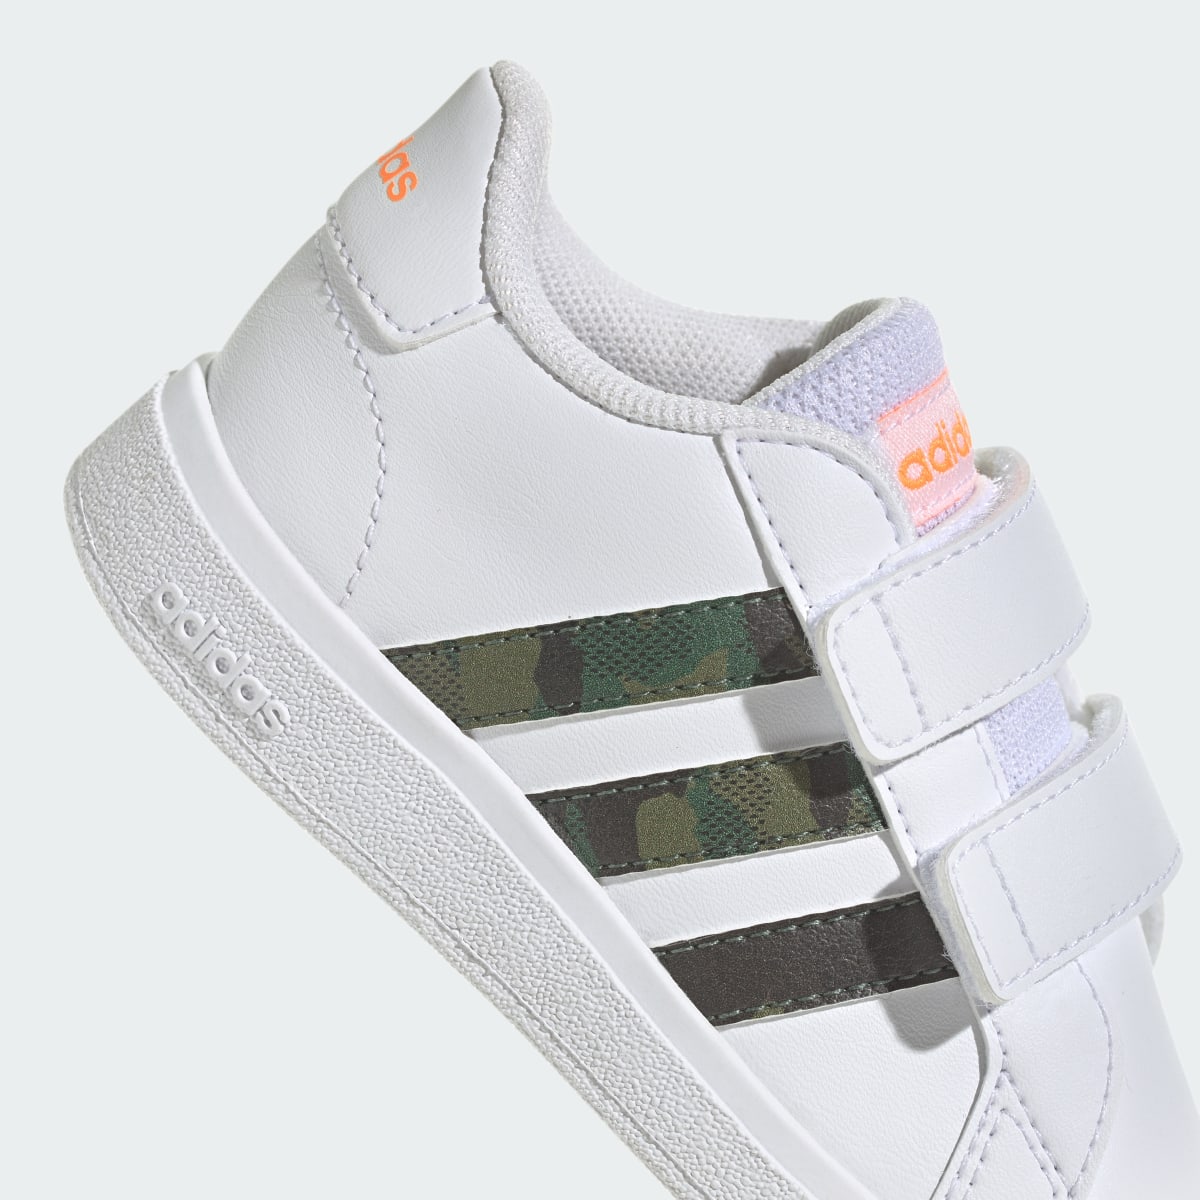 Adidas Grand Court Lifestyle Hook and Loop Schuh. 10